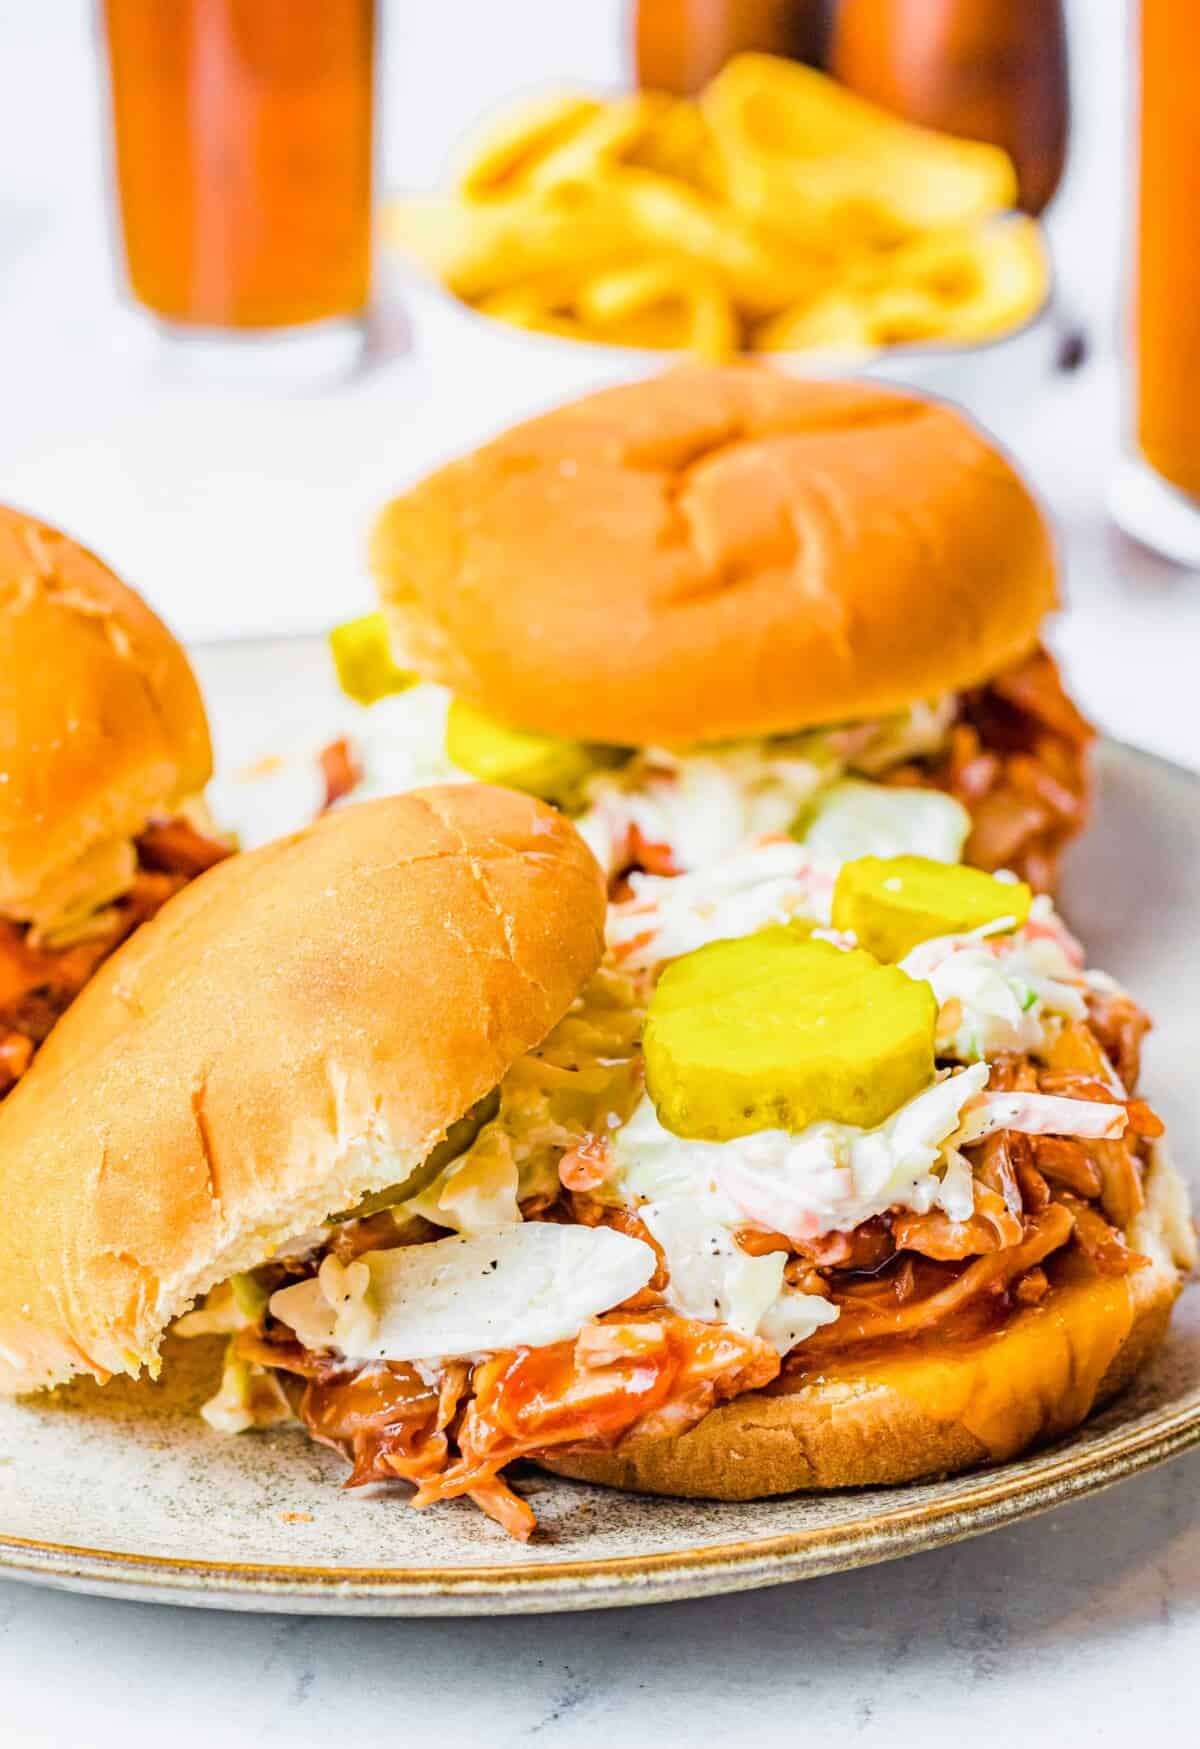 The top bun of a sandwich is put to the side to reveal pickles, coleslaw and pulled chicken.